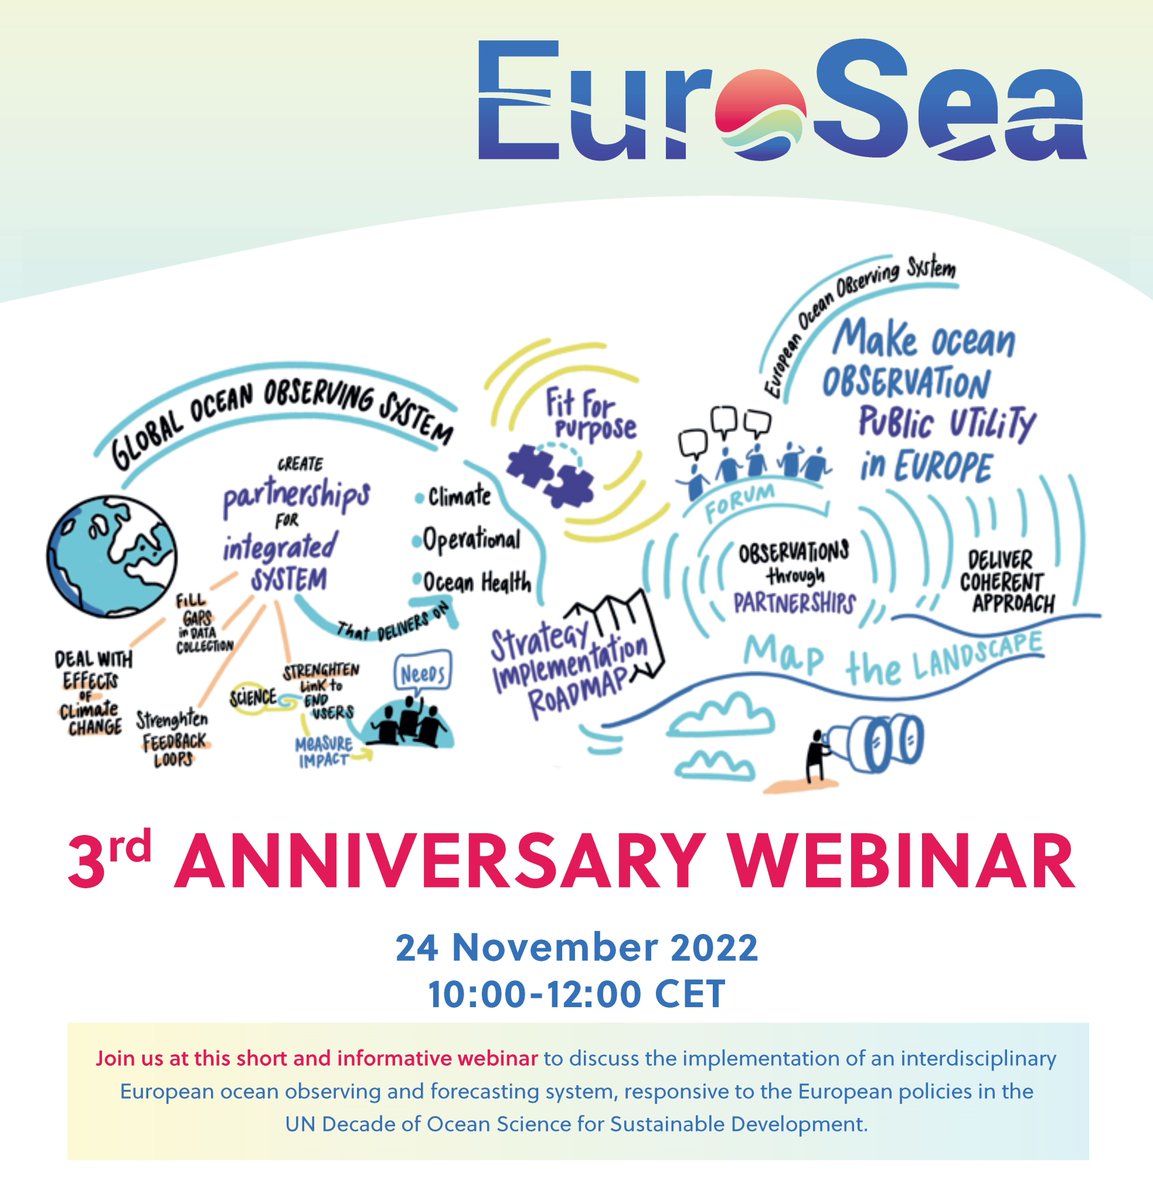 📢 We are holding our 3rd Anniversary Webinar on 24 November (10-12 CET). Please join us to learn about EuroSea actions and innovations to enhance Europe's #oceanobserving and forecasting system! 🌊 👉 Registration is open: geomar-de.zoom.us/meeting/regist…